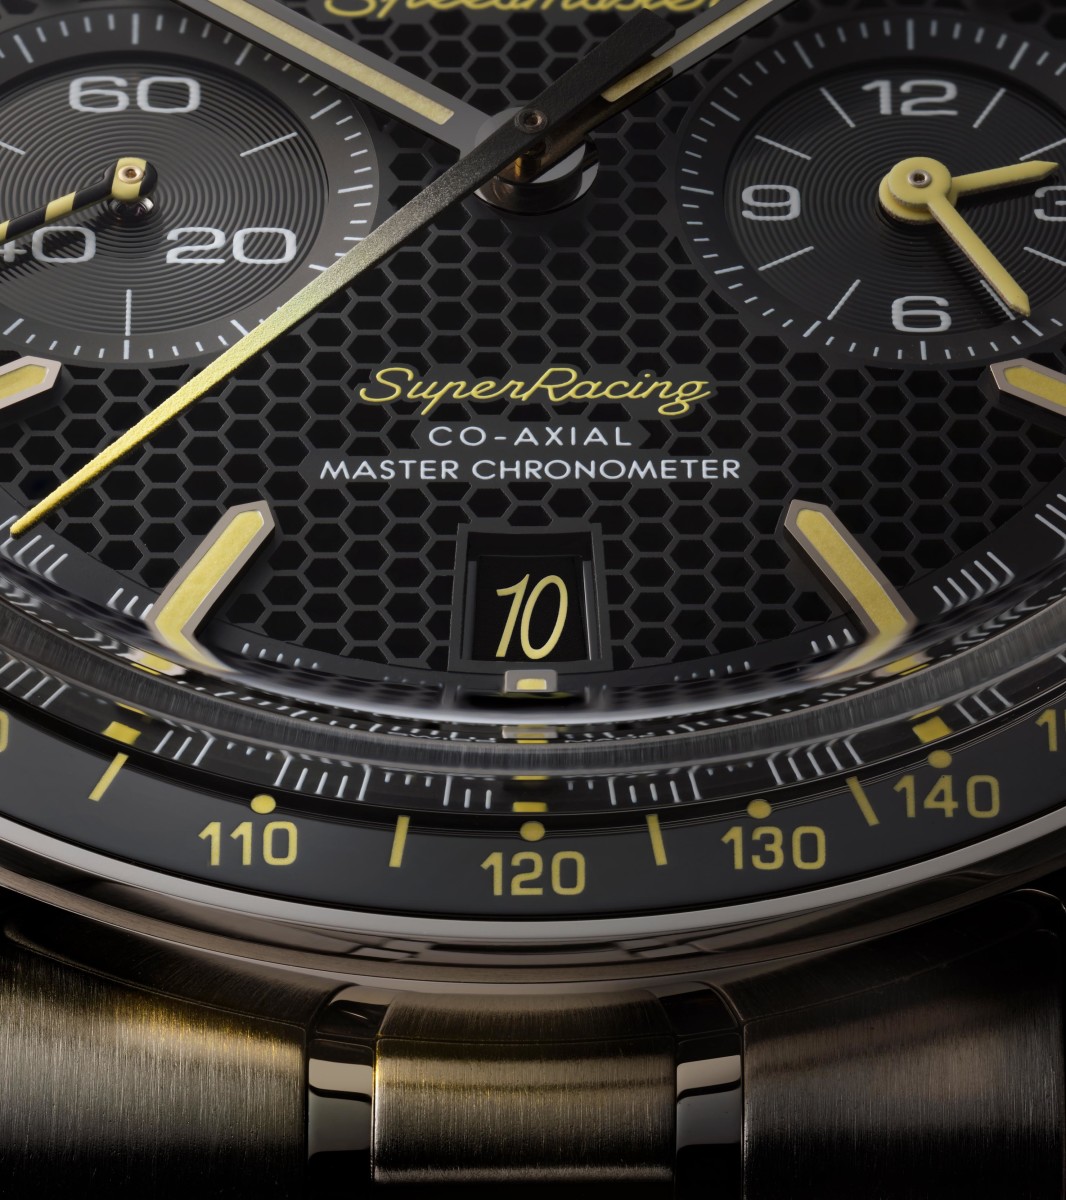 Omega debuts its Spirate System in the new Speedmaster Super Racing